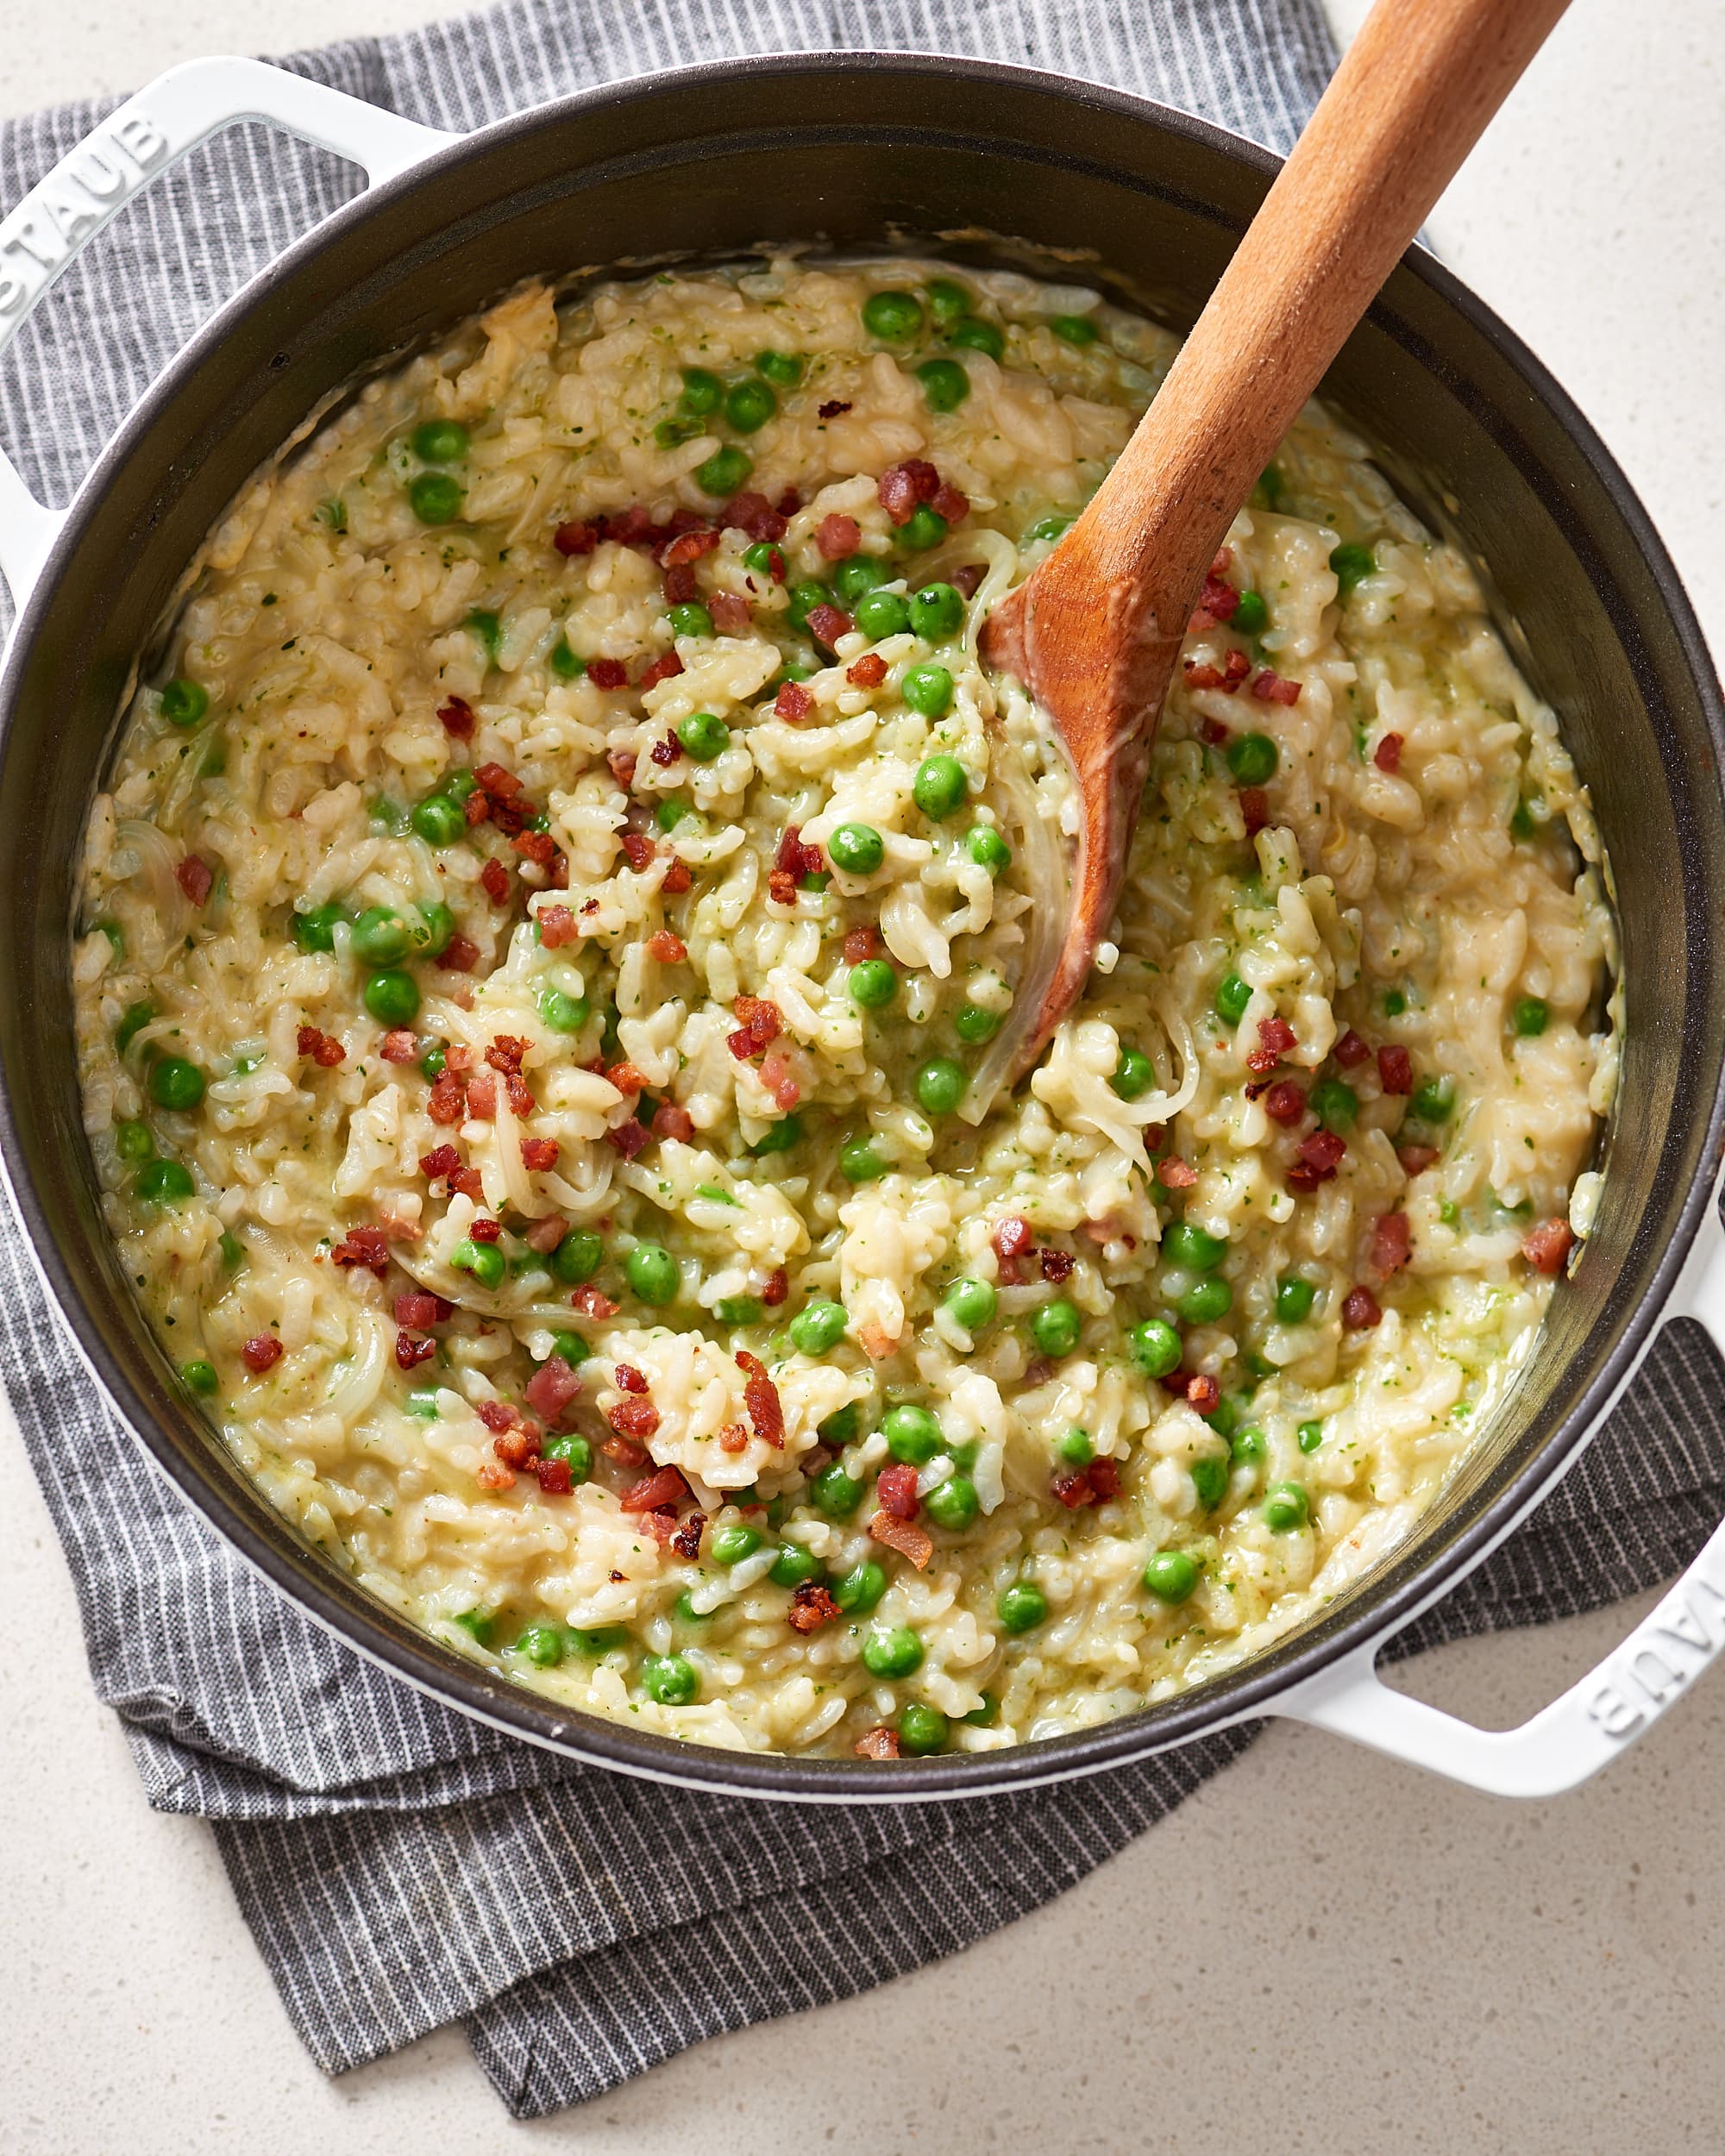 What Is Risotto? And How to Make Risotto, Cooking School